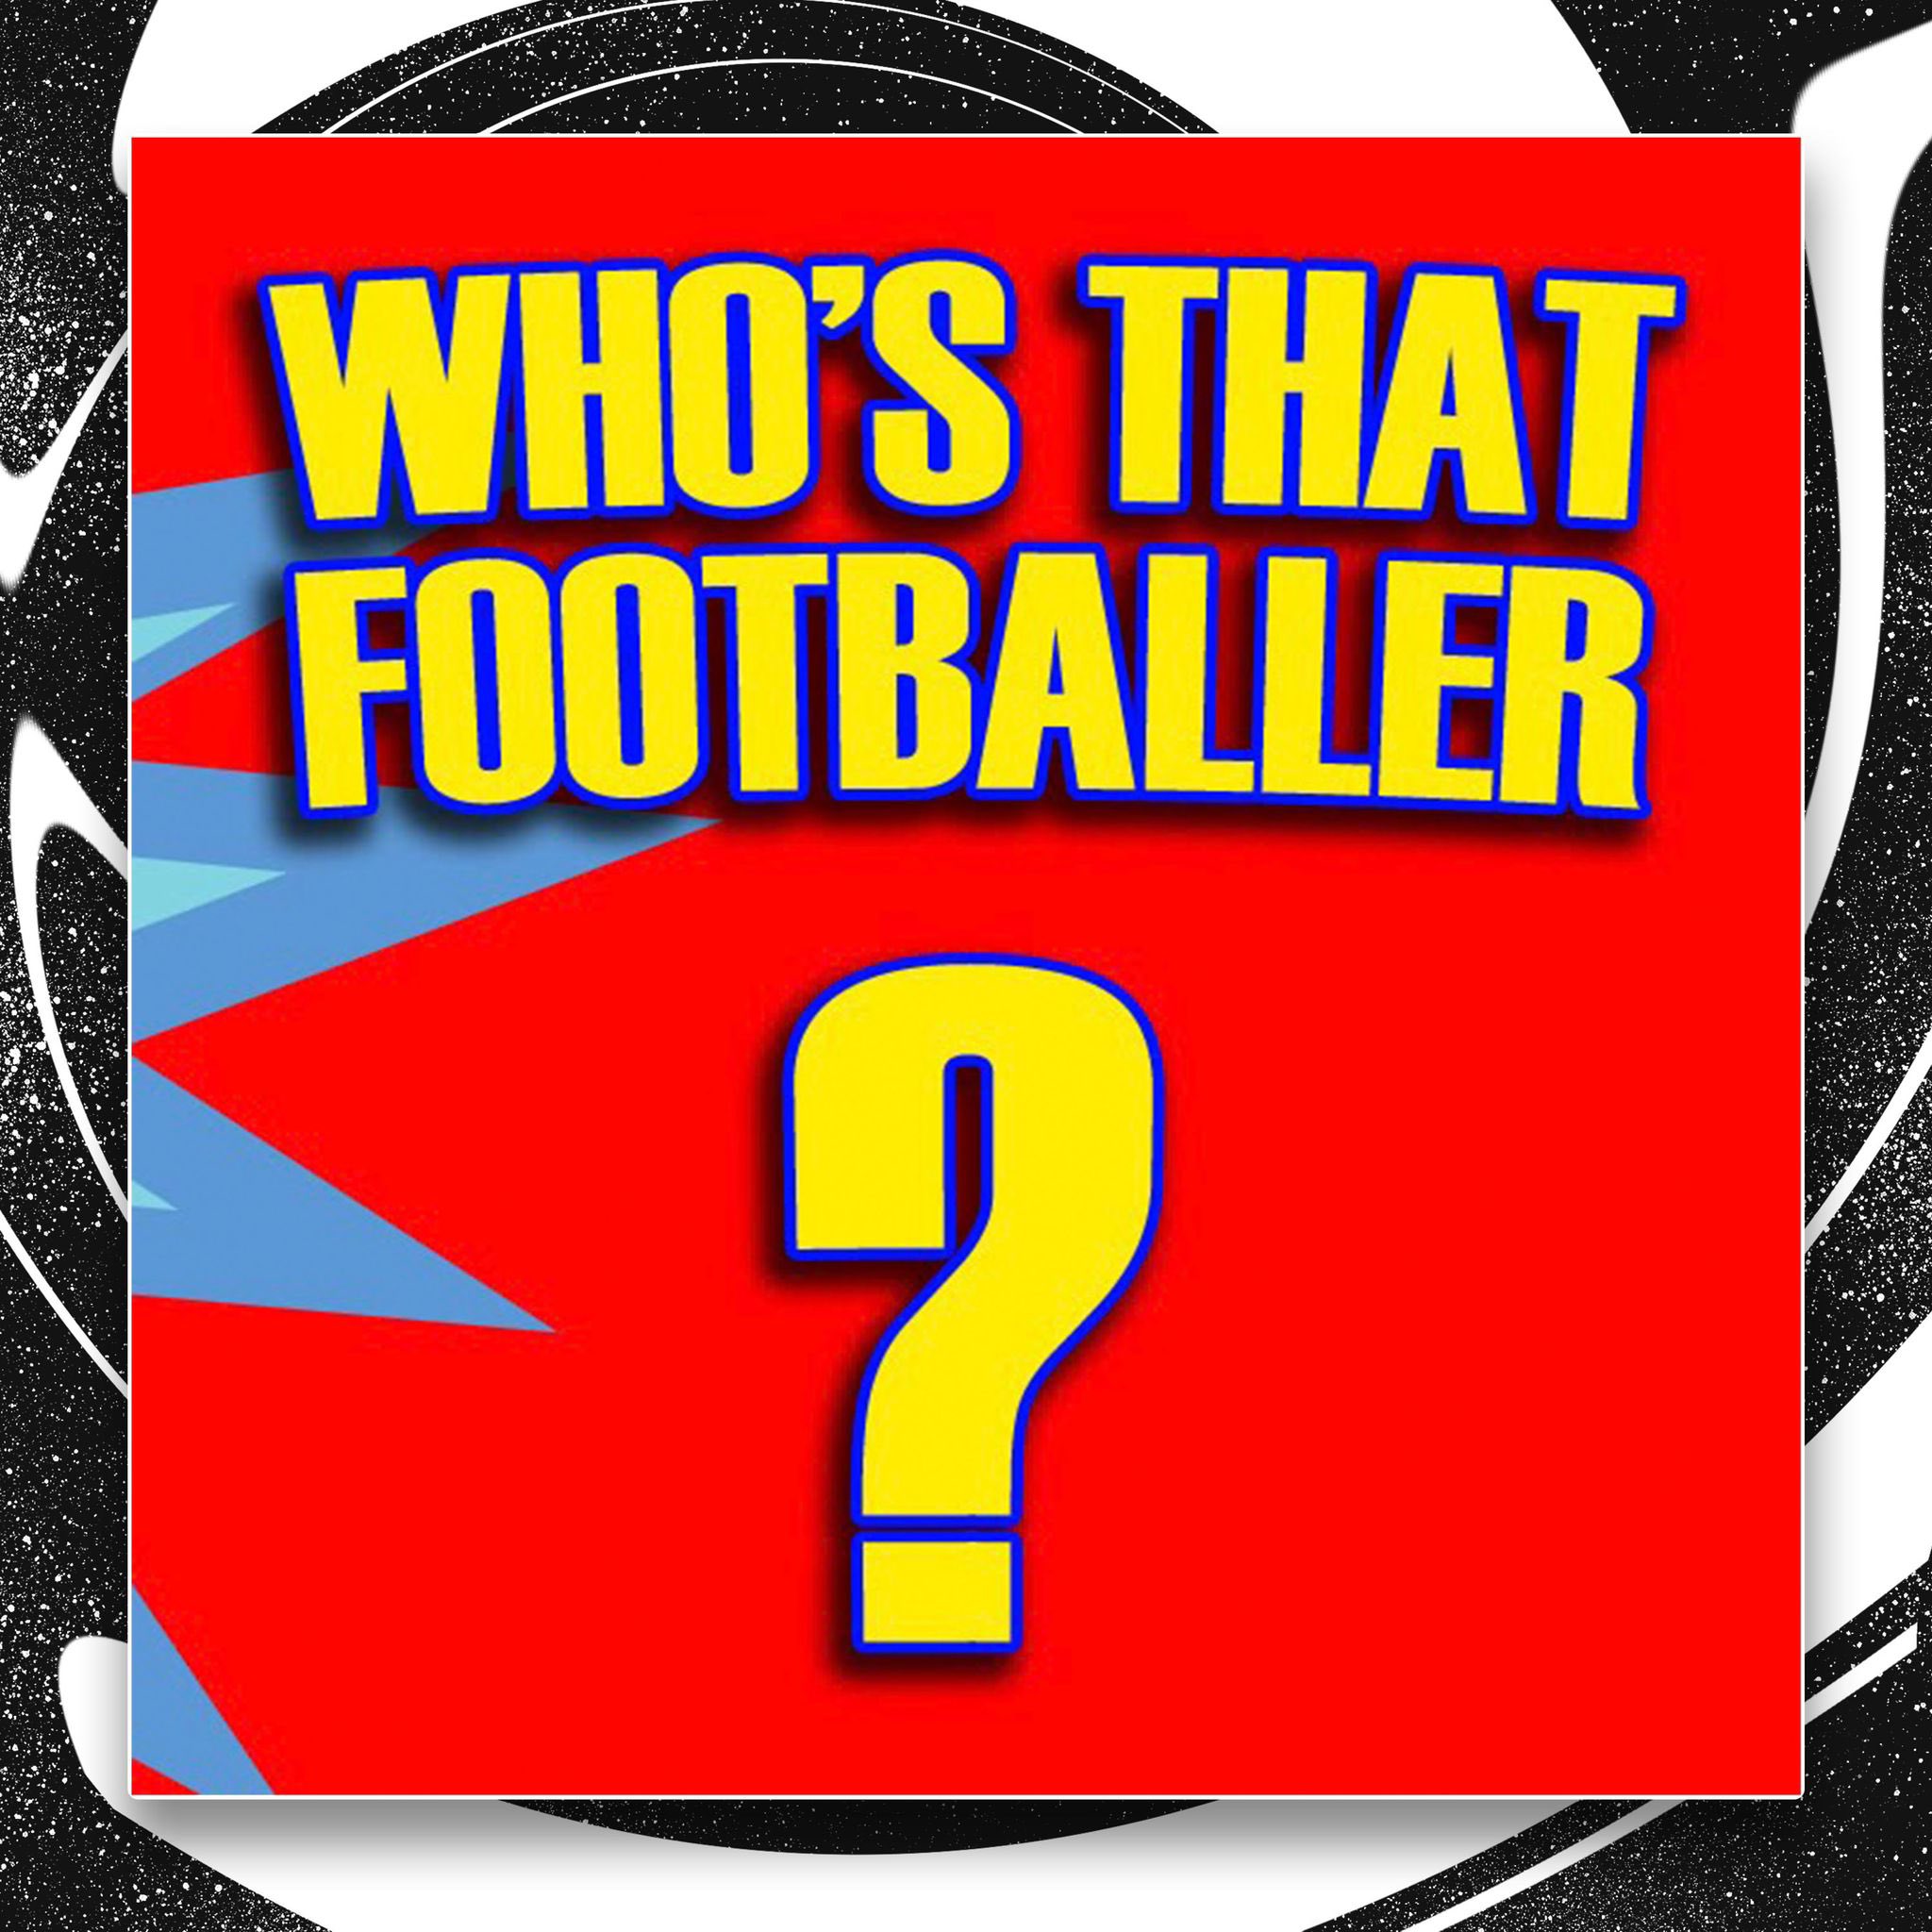 Guess the Football Club a Player Plays For! #football #soccer 